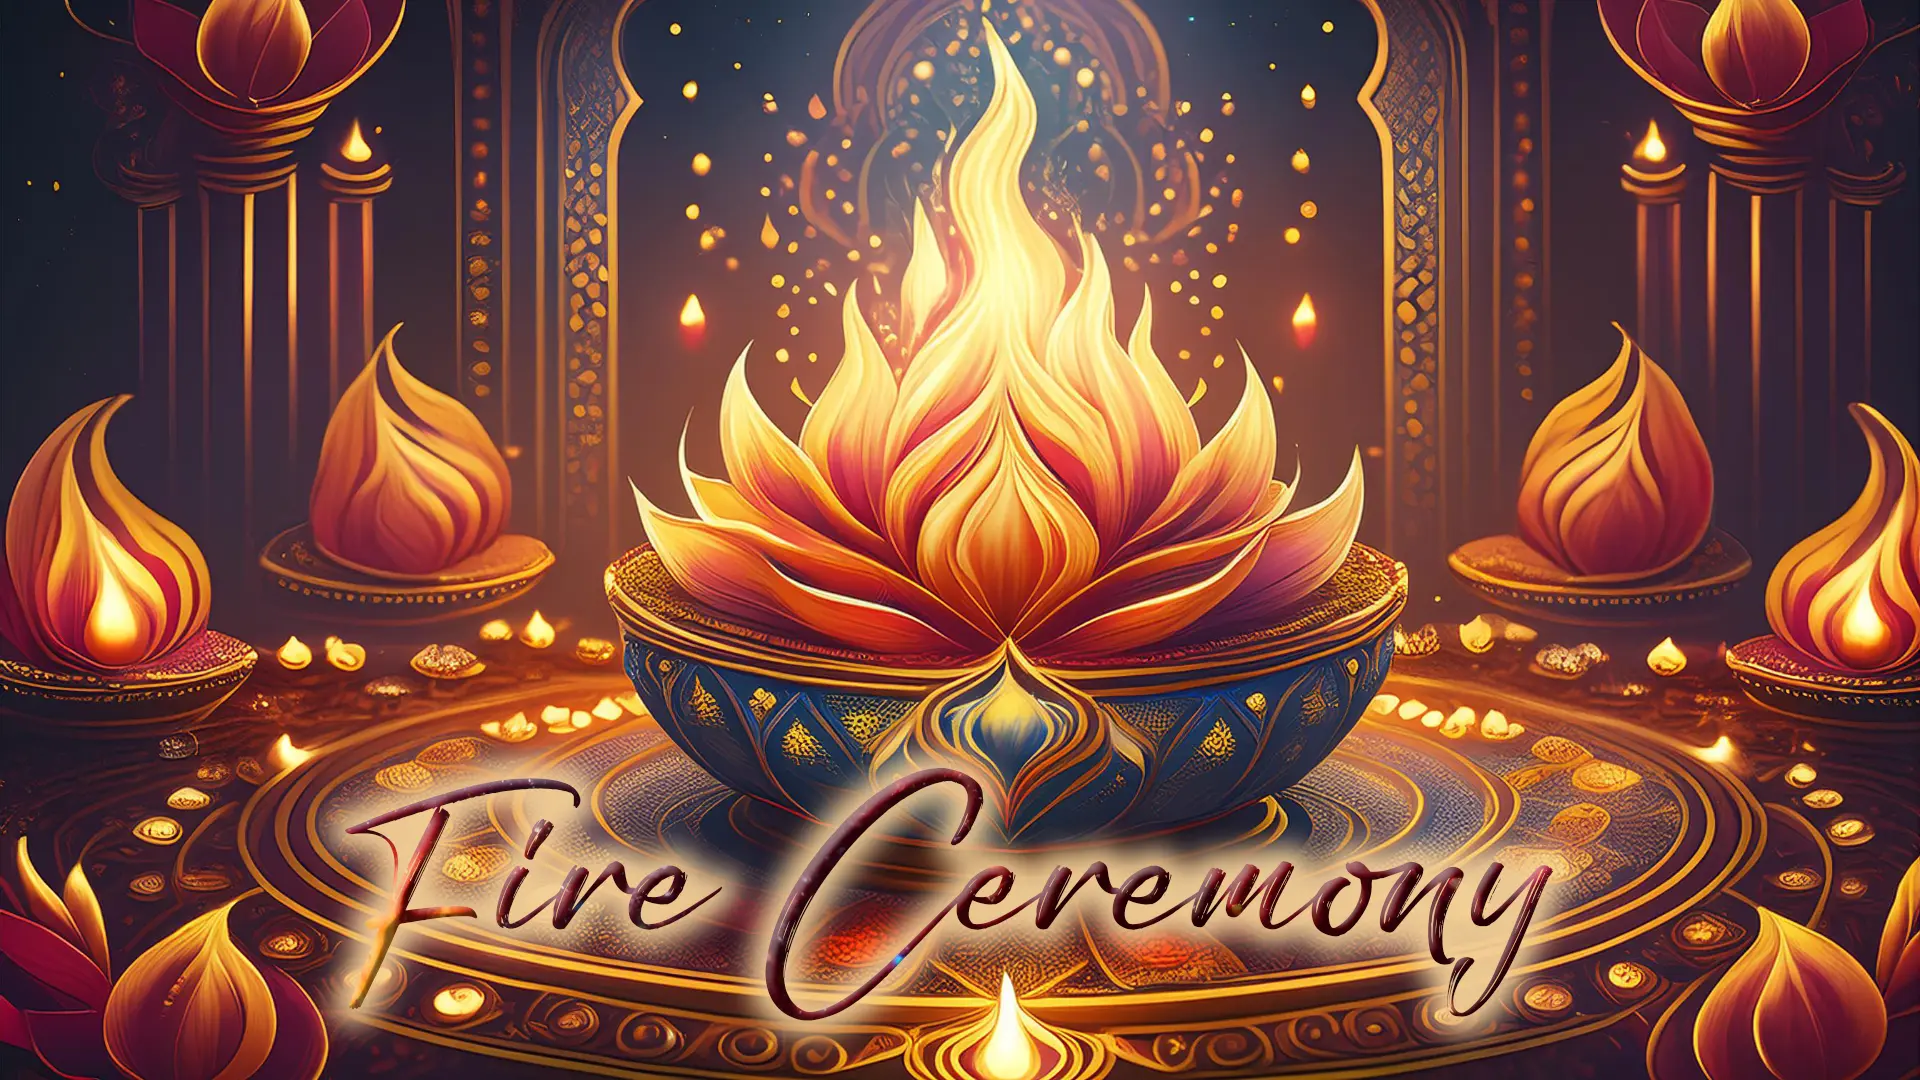 Fire Ceremony concept image for background